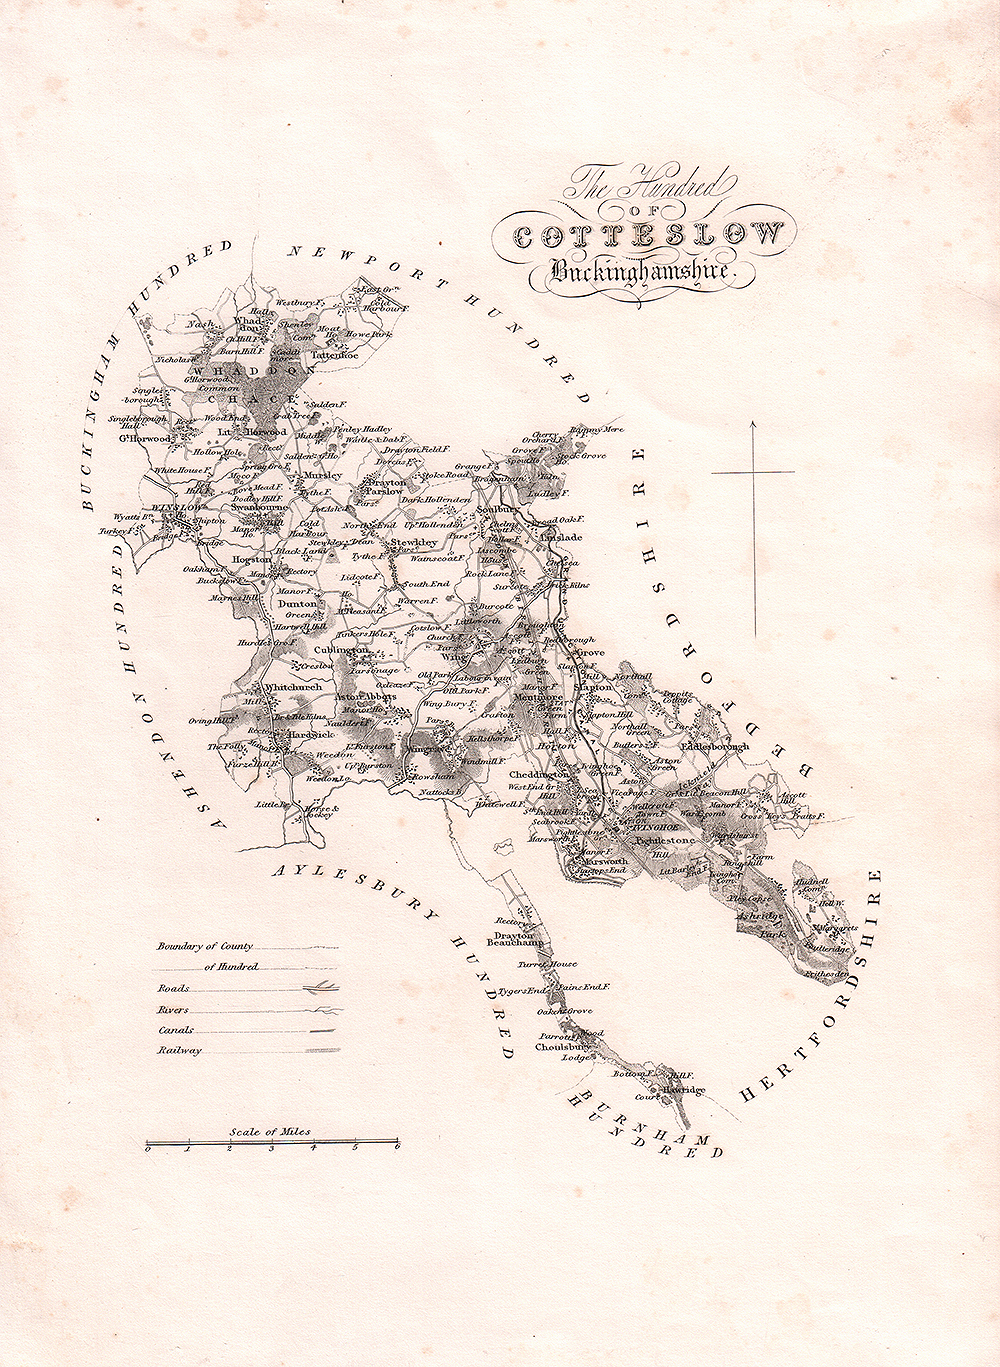 The Hundred of Cotteslow Buckinghamshire